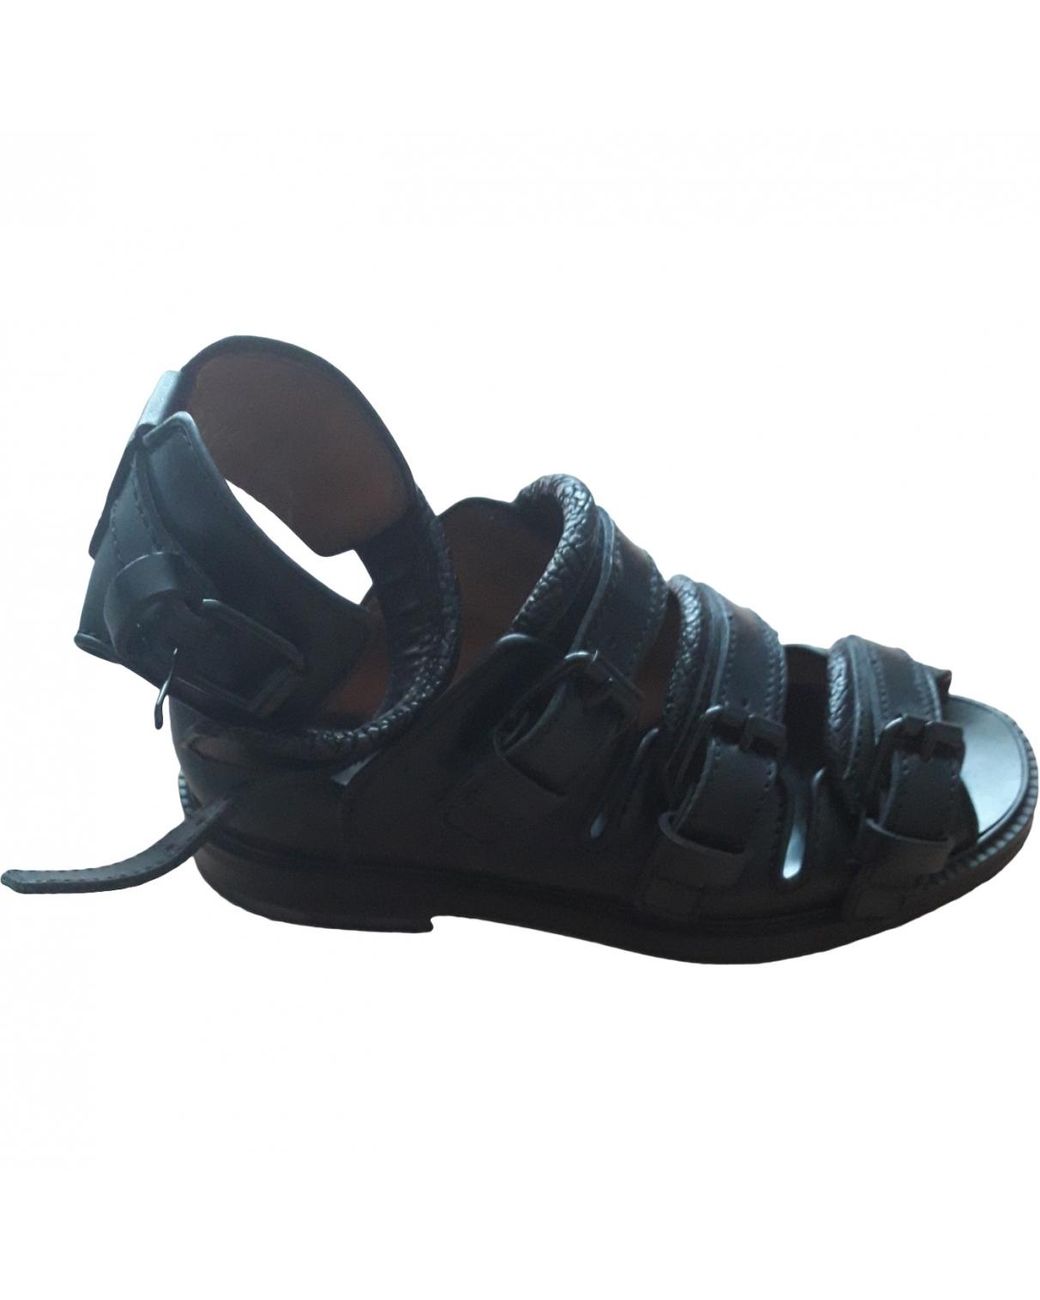 Givenchy Leather Sandals in Black for Men - Lyst